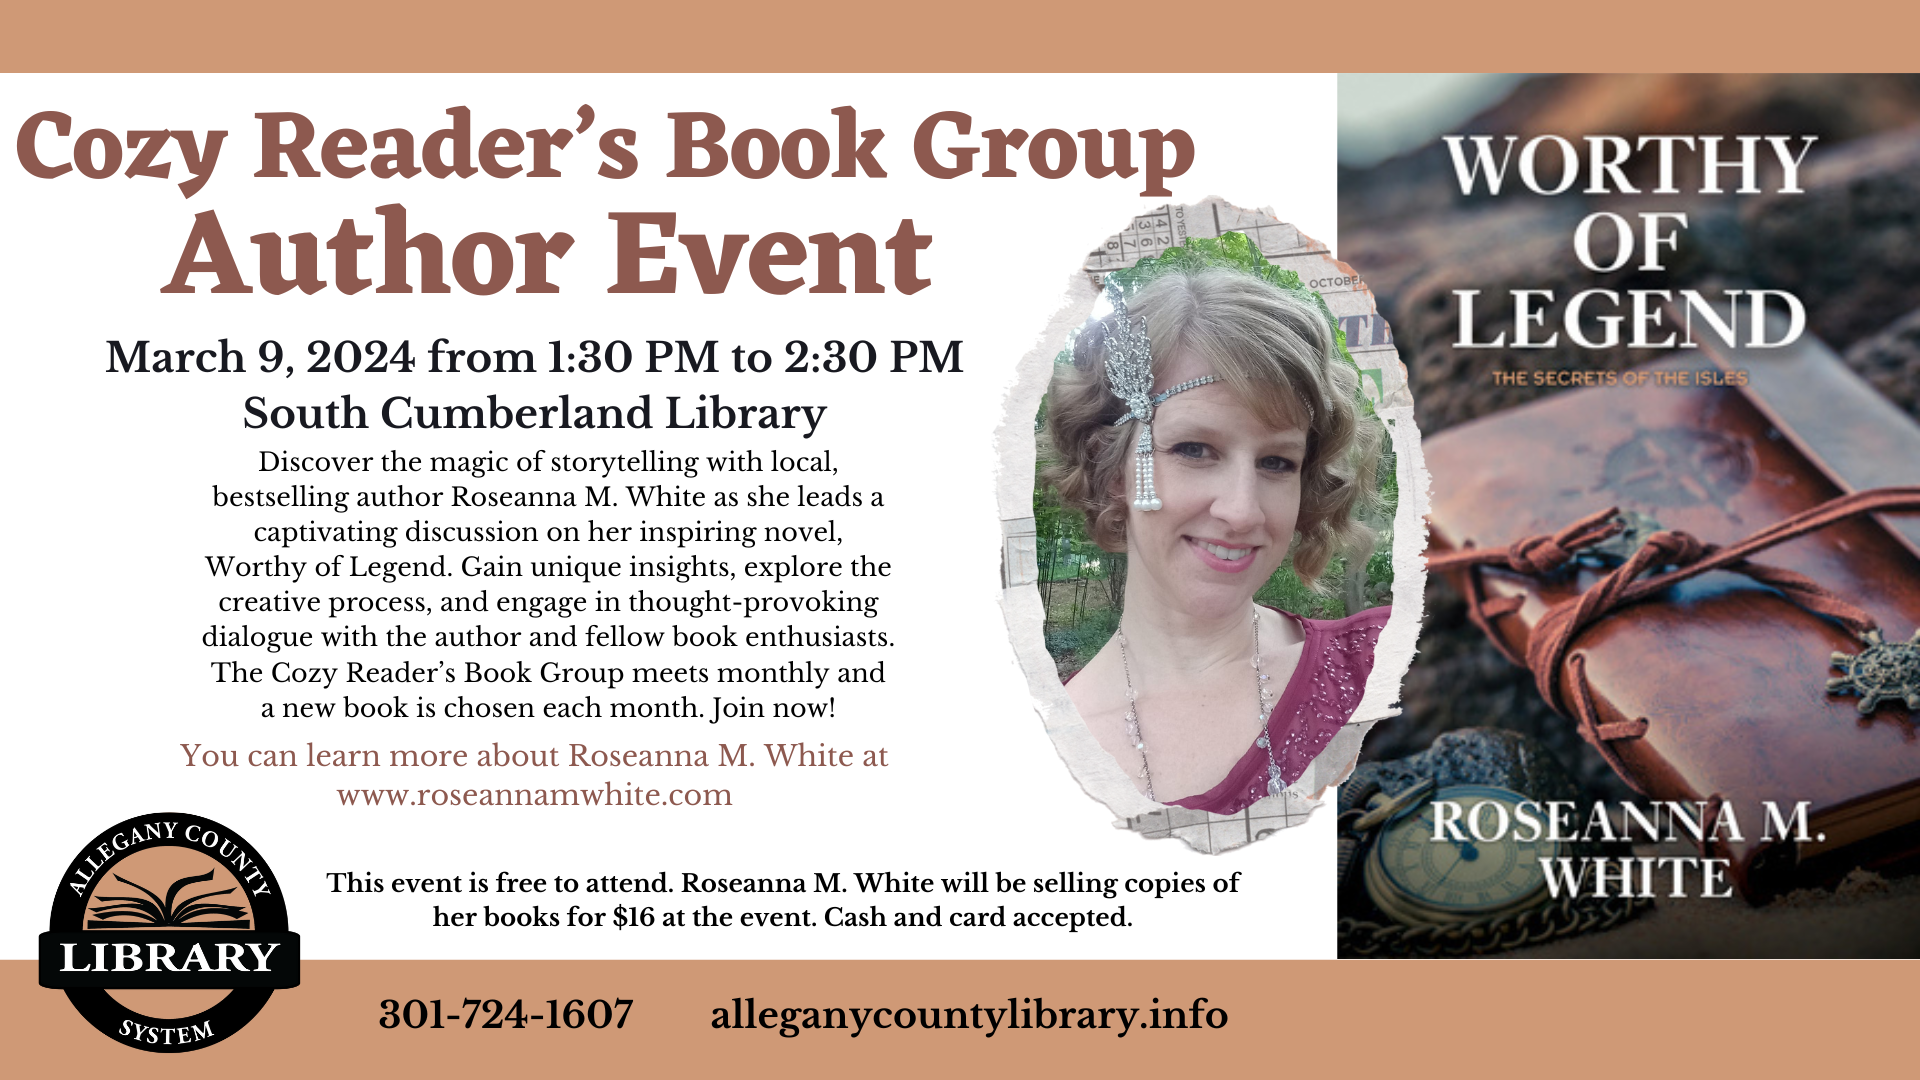 Photo of author and book beside event details